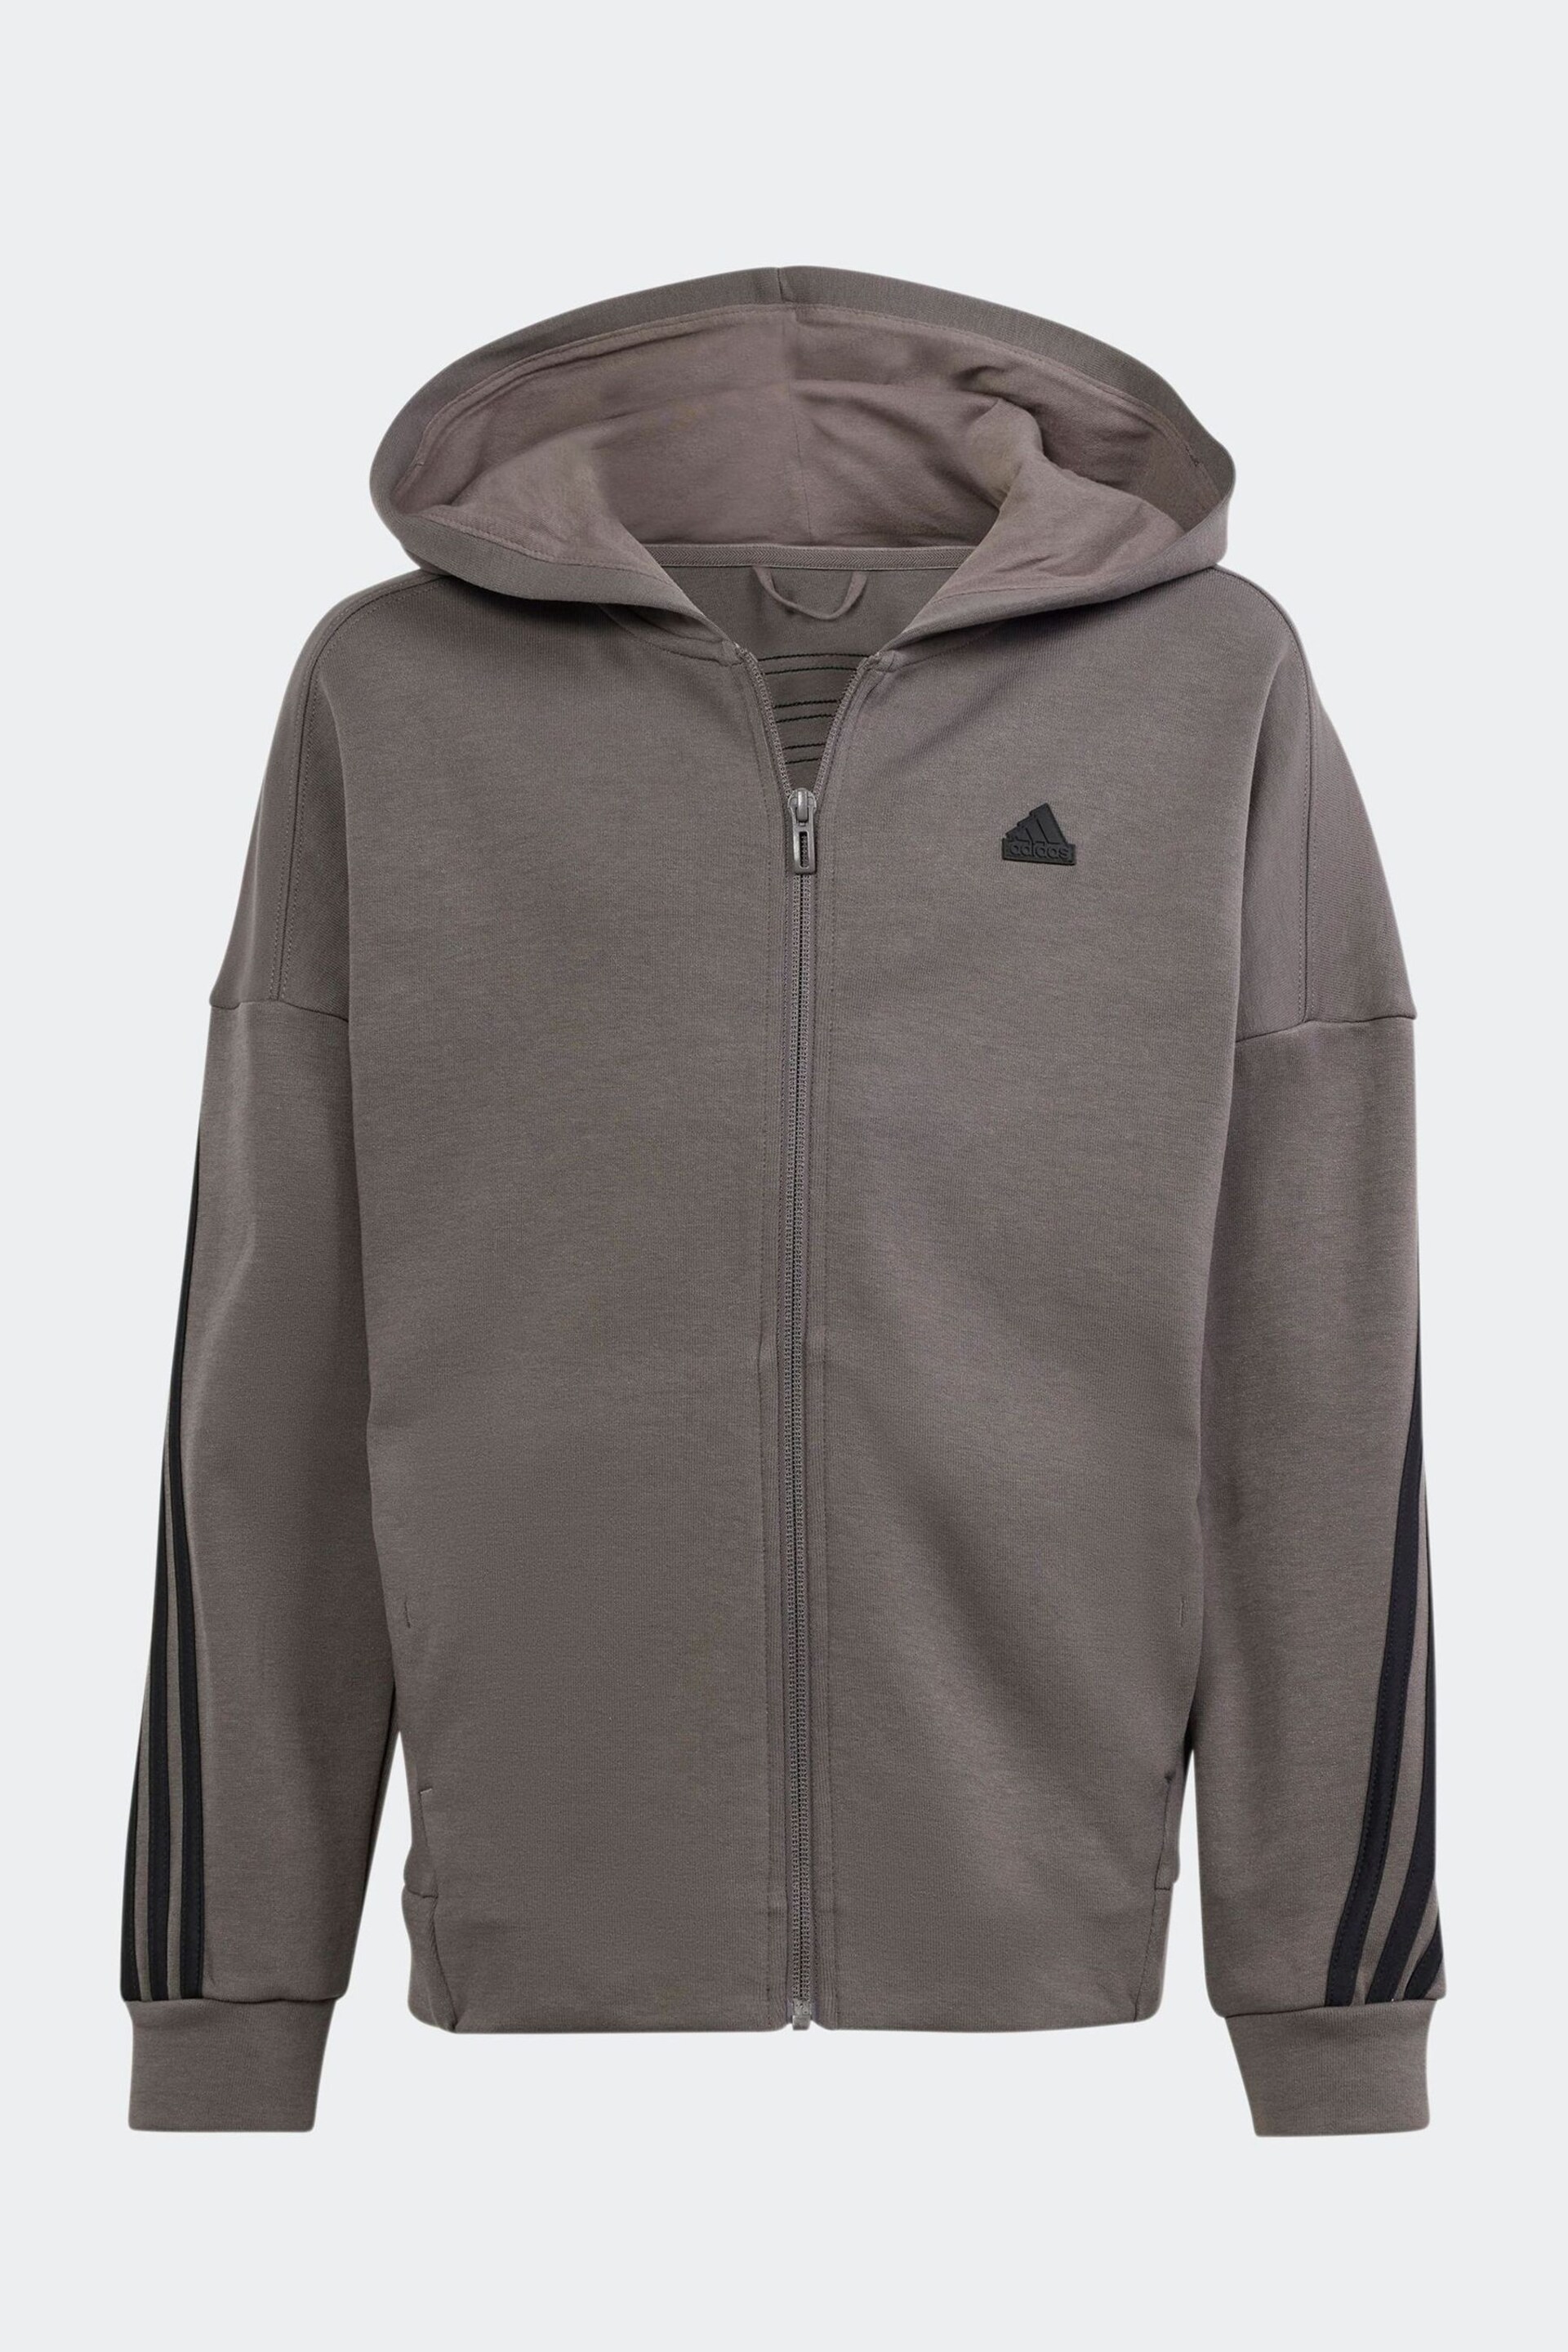 adidas Charcoal Grey Sportswear Future Icons 3-Stripes Full-Zip Hooded Track Top - Image 1 of 5